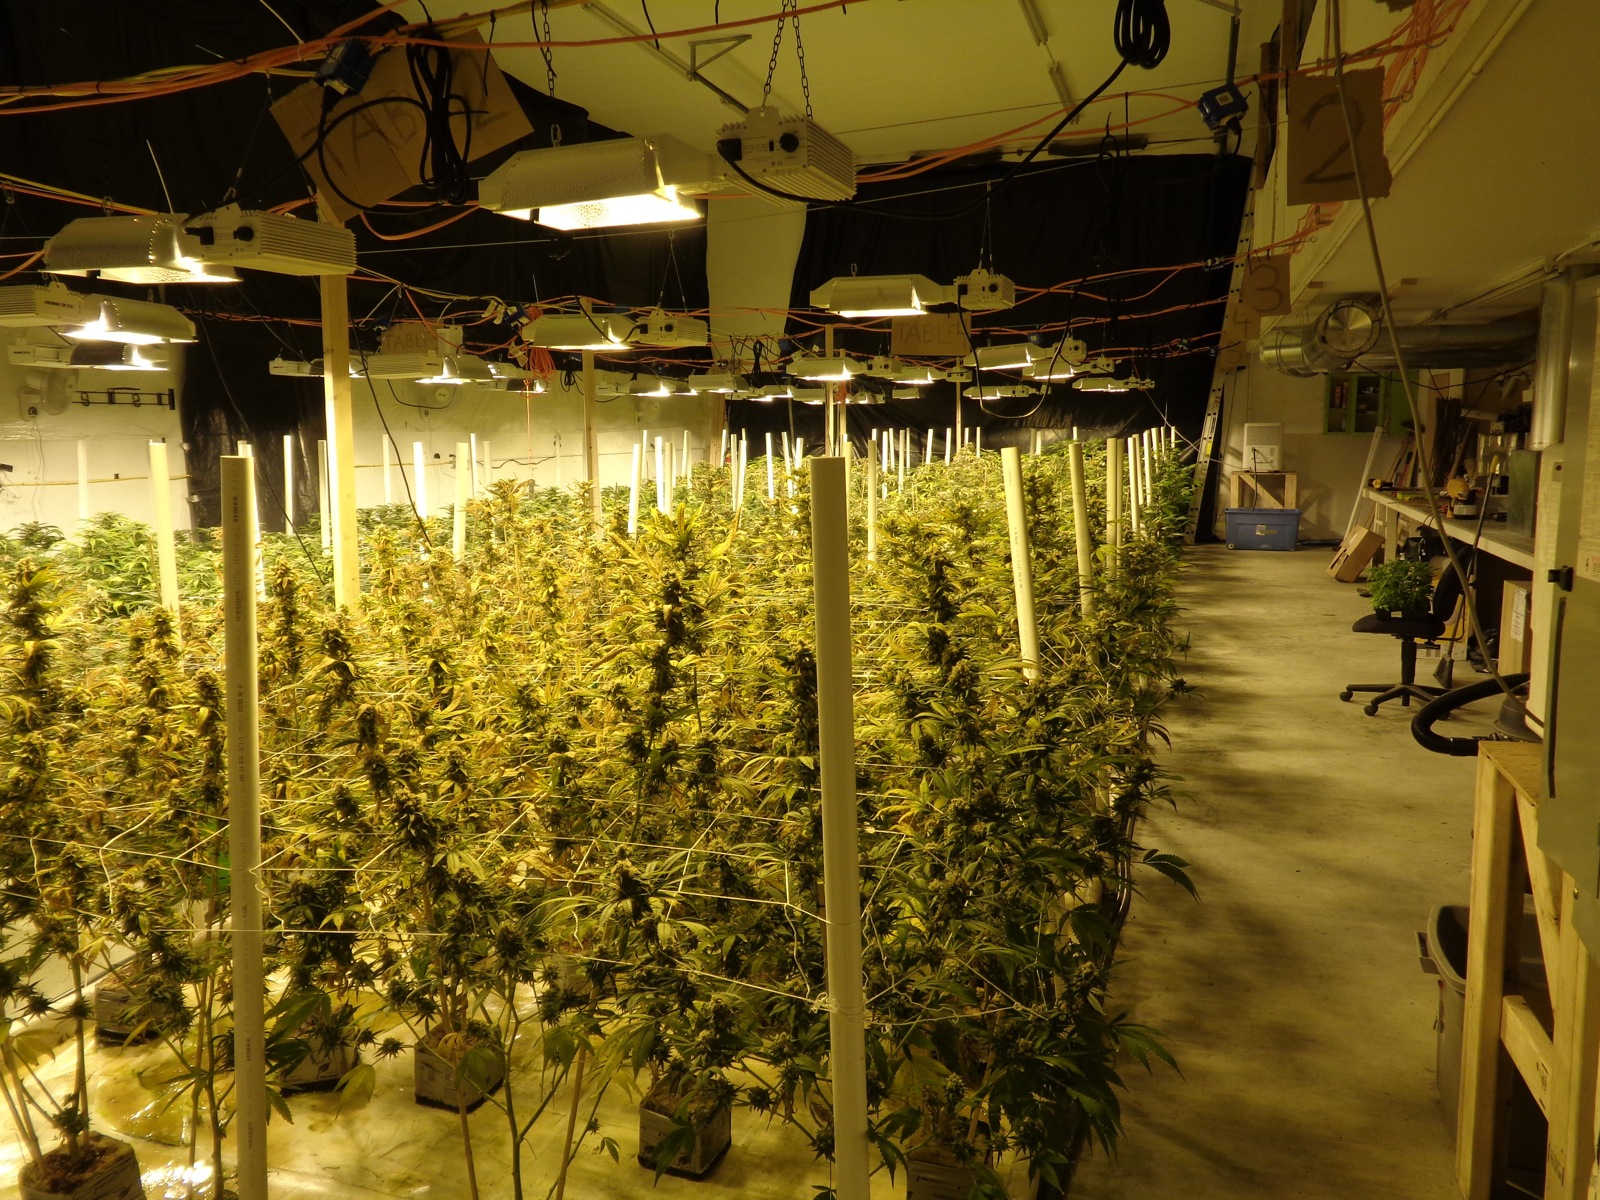 Mature and budding cannabis plants fill up one bay of a 4,400-square-foot building where Homer Police busted a record marijuana grow operation with 1,000 plants.               -Photo provided